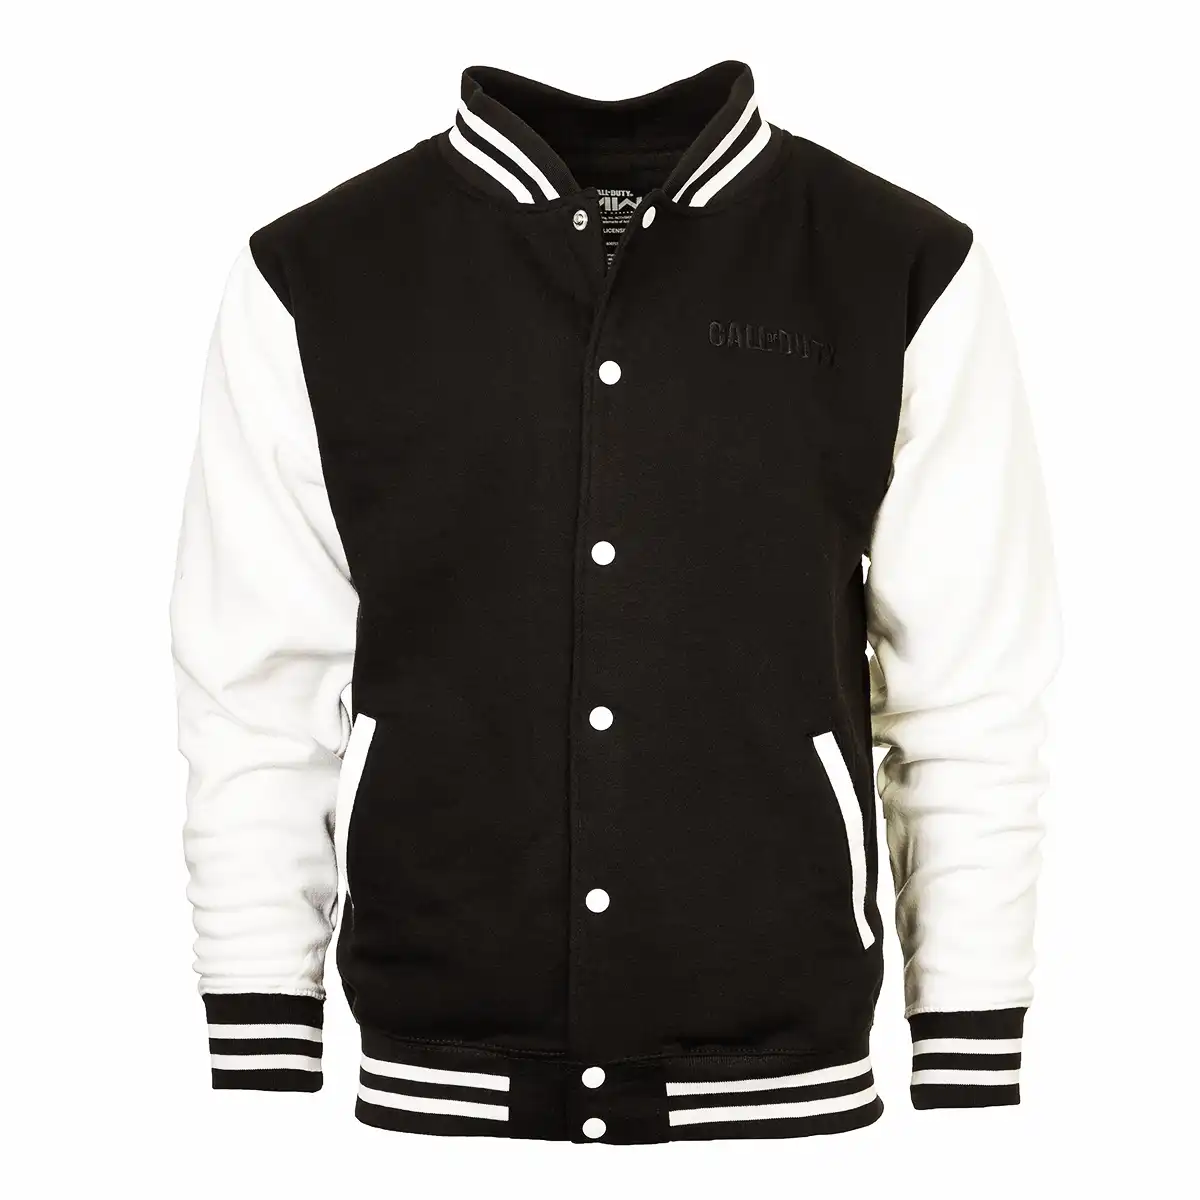 Call of Duty College Jacket "Ghost" Black/White XL